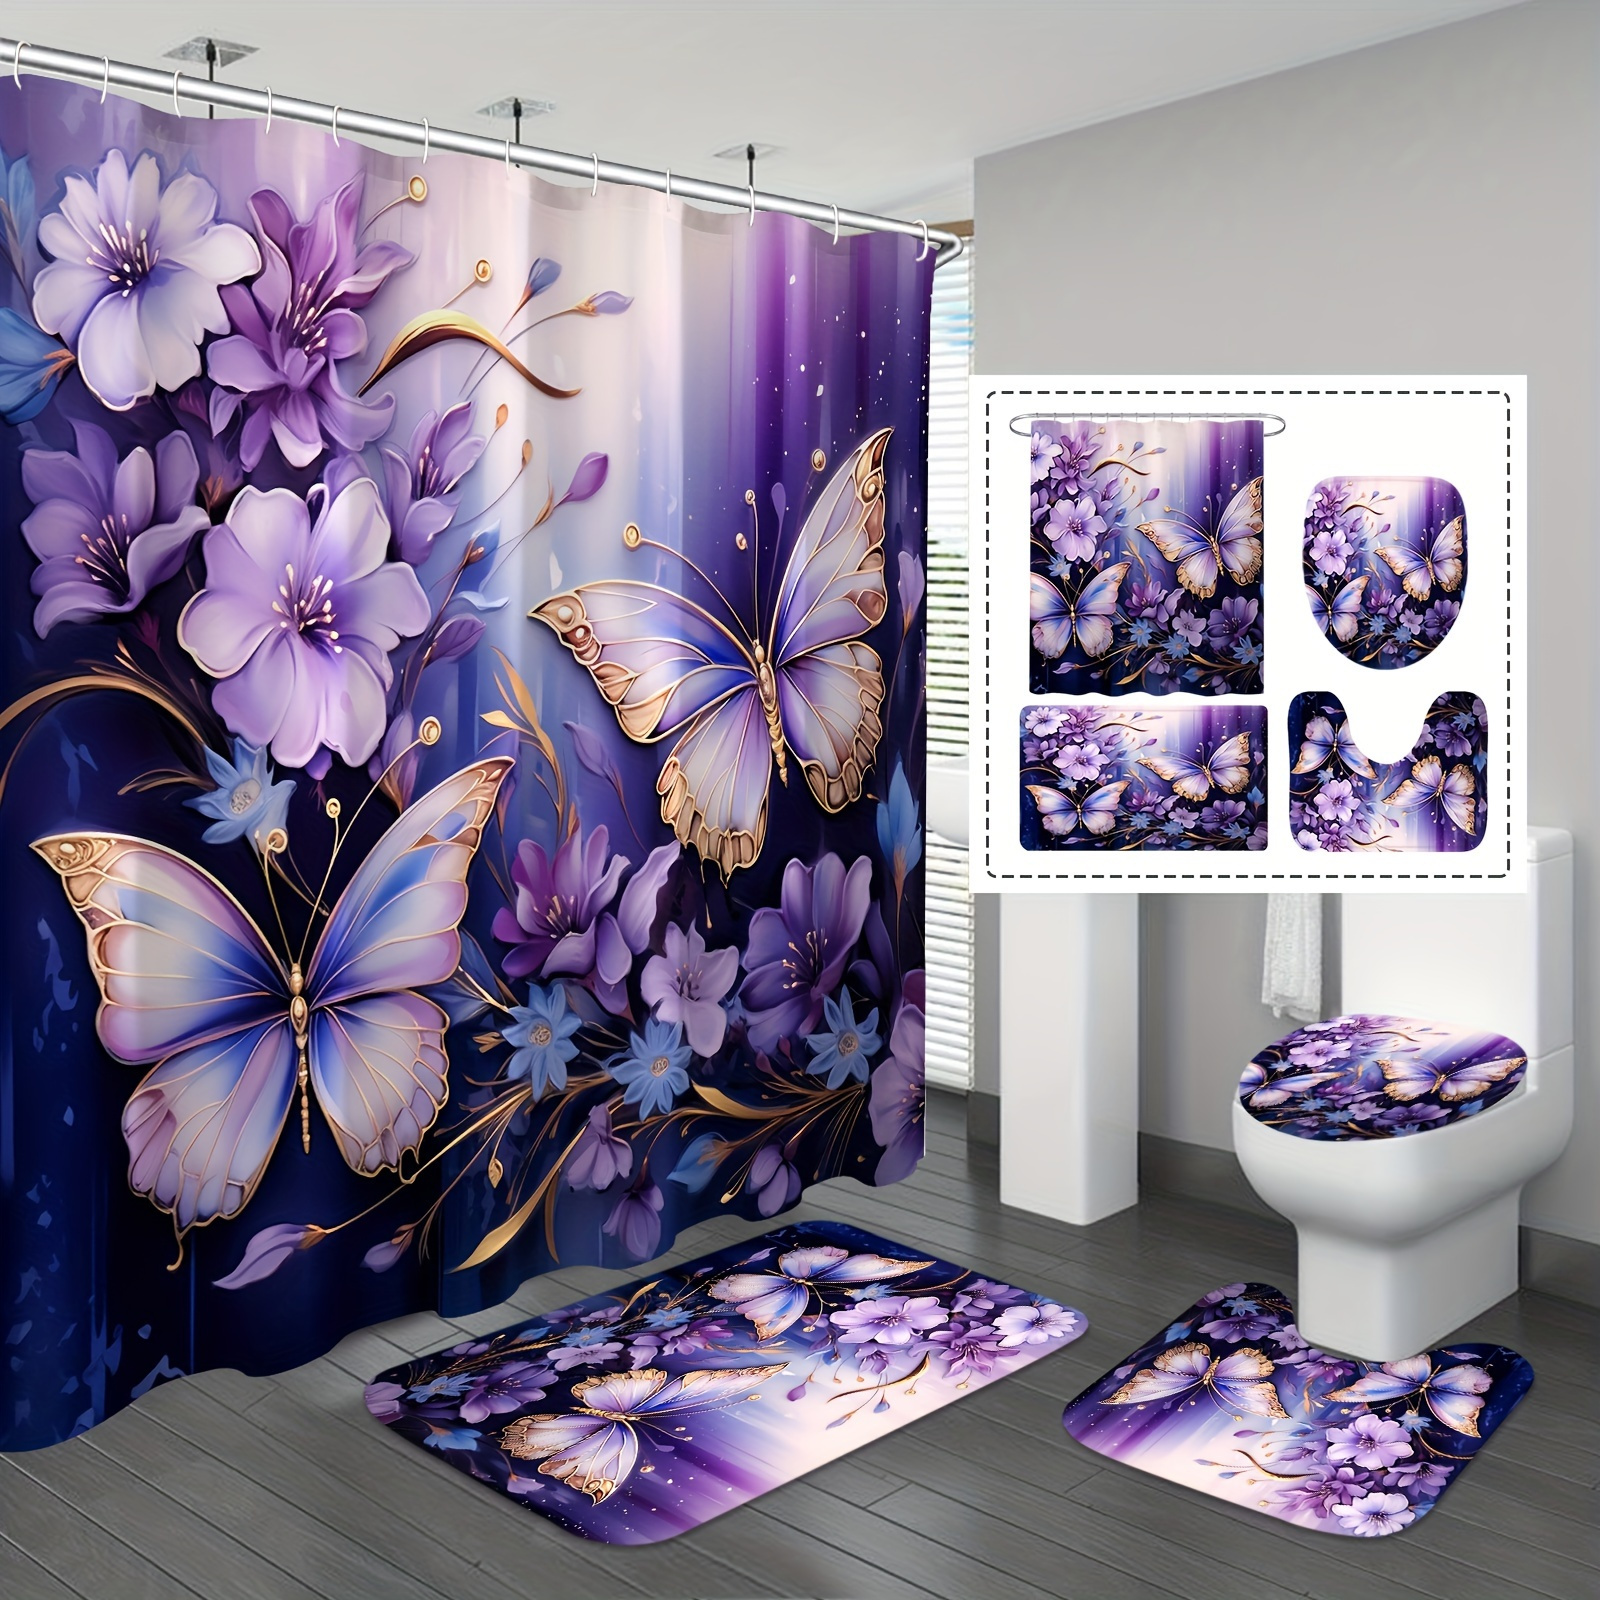 

4-piece Purple Butterfly Floral Shower Curtain Ensemble - Waterproof & Decorative, Complete With Non-slip Mat, Toilet Lid Cover & U-shape Rug - Transform Your Bathroom Into A Stylish Haven